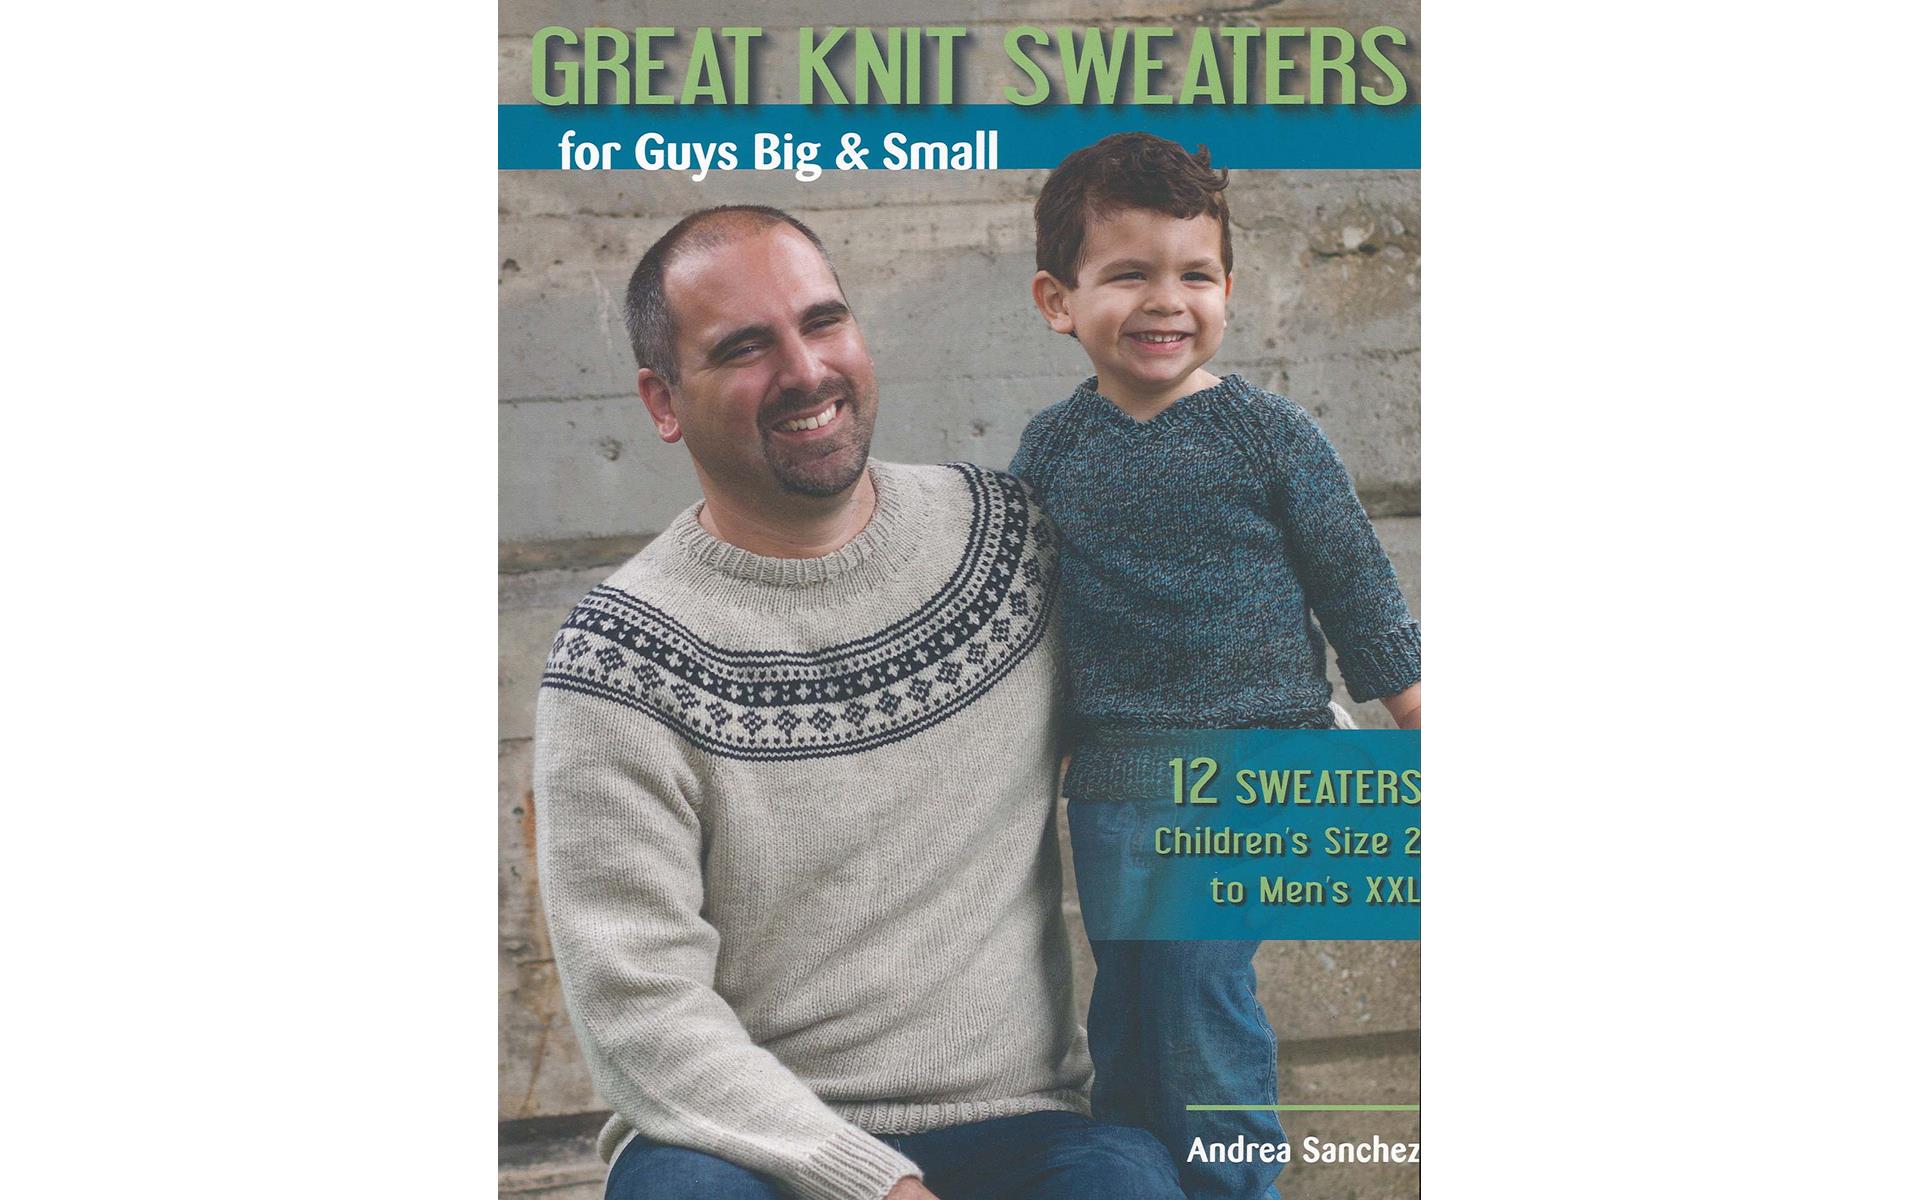 Great Knit Sweaters For Guys Big and Small